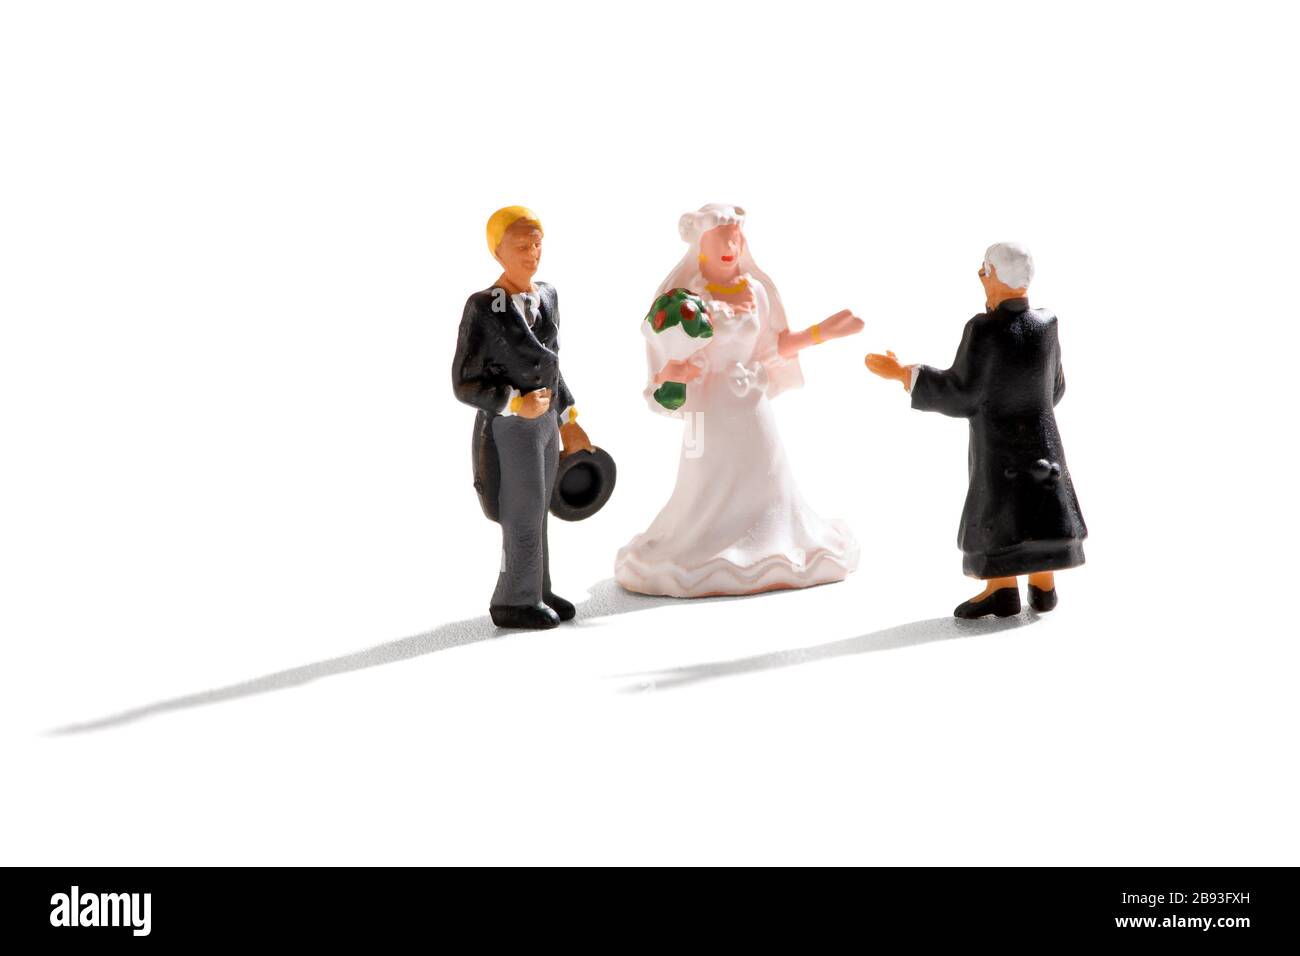 Priest conducting a miniature wedding scene with groom and bride in a white gown on a white background with shadows Stock Photo